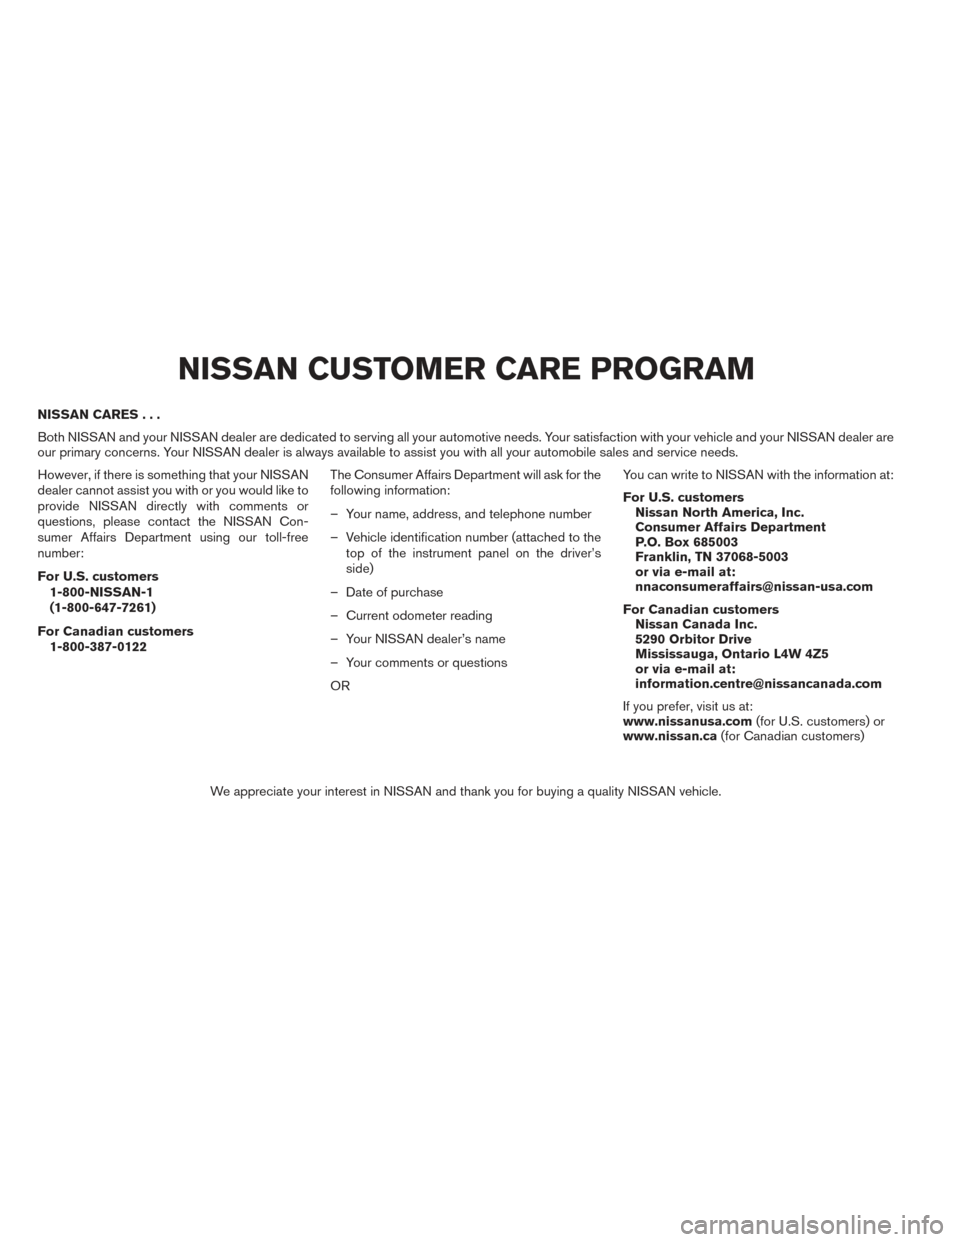 NISSAN ALTIMA 2014 L33 / 5.G Owners Manual NISSAN CARES...
Both NISSAN and your NISSAN dealer are dedicated to serving all your automotive needs. Your satisfaction with your vehicle and your NISSAN dealer are
our primary concerns. Your NISSAN 